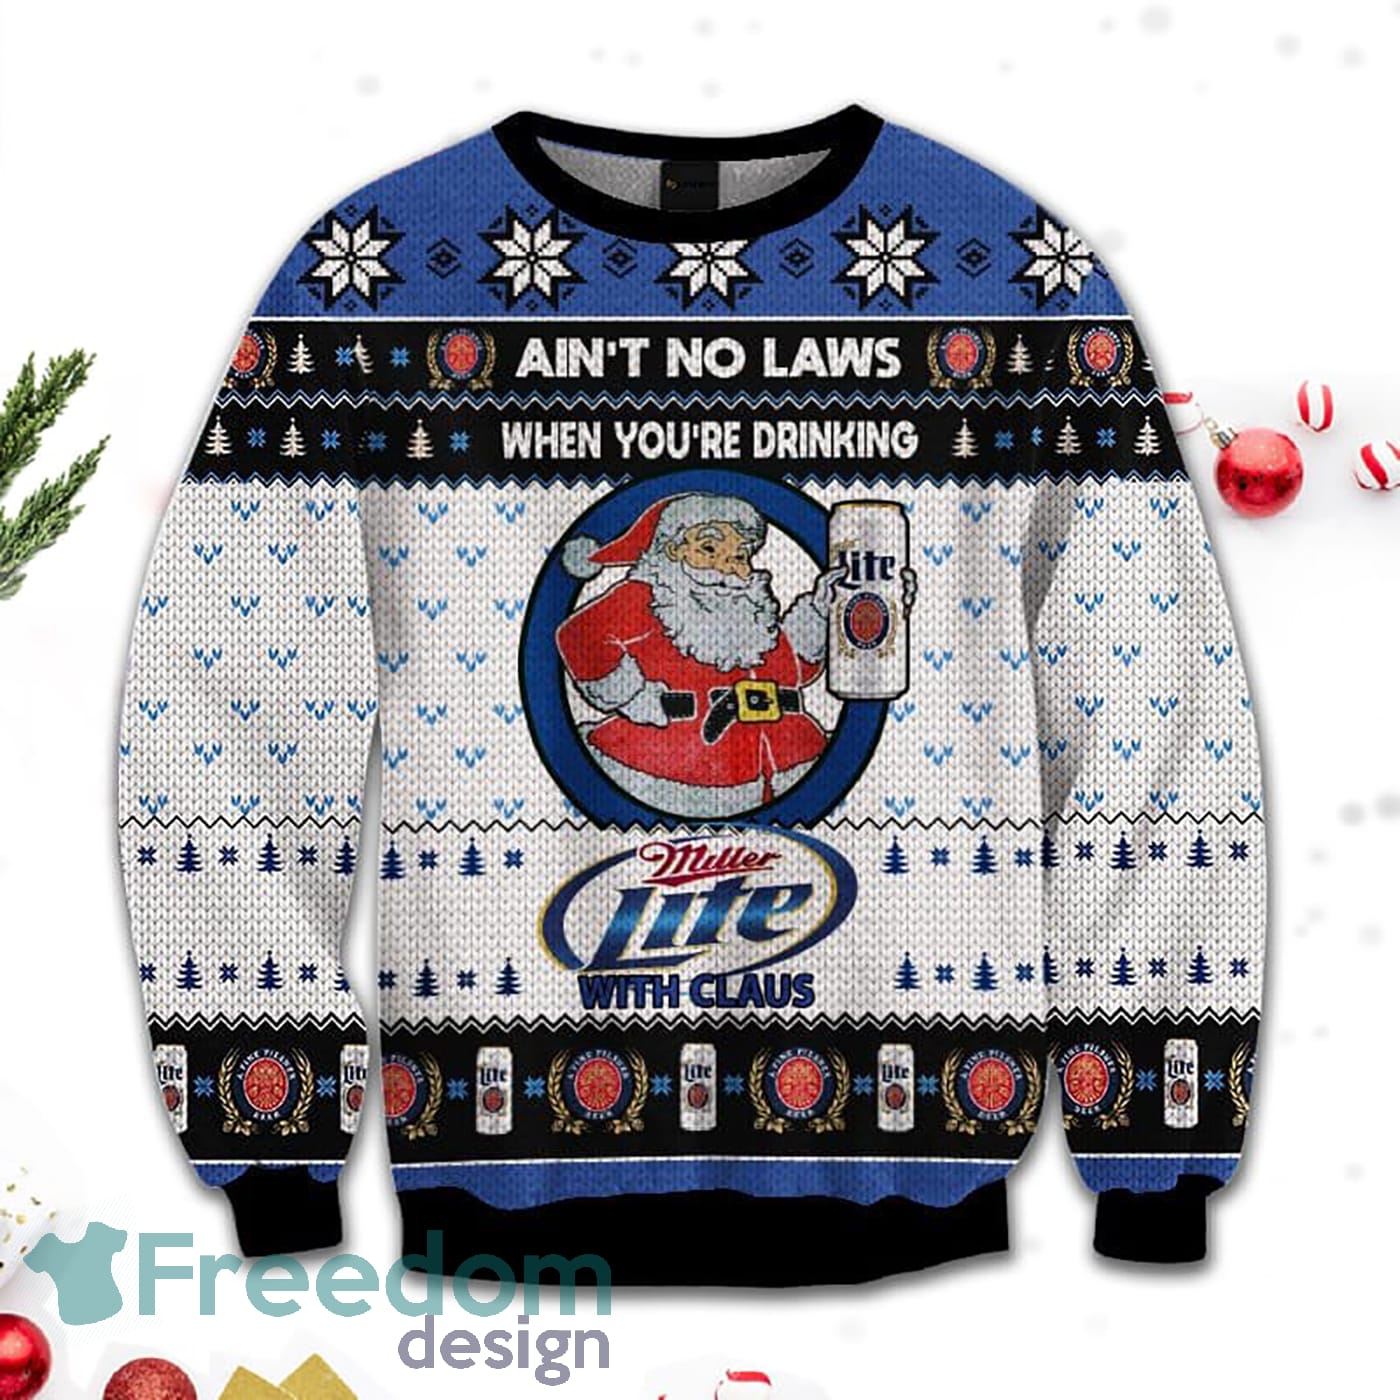 Merr Christmas Ain't No Laws When You Drink Miller Lite With Claus Sweatshirt